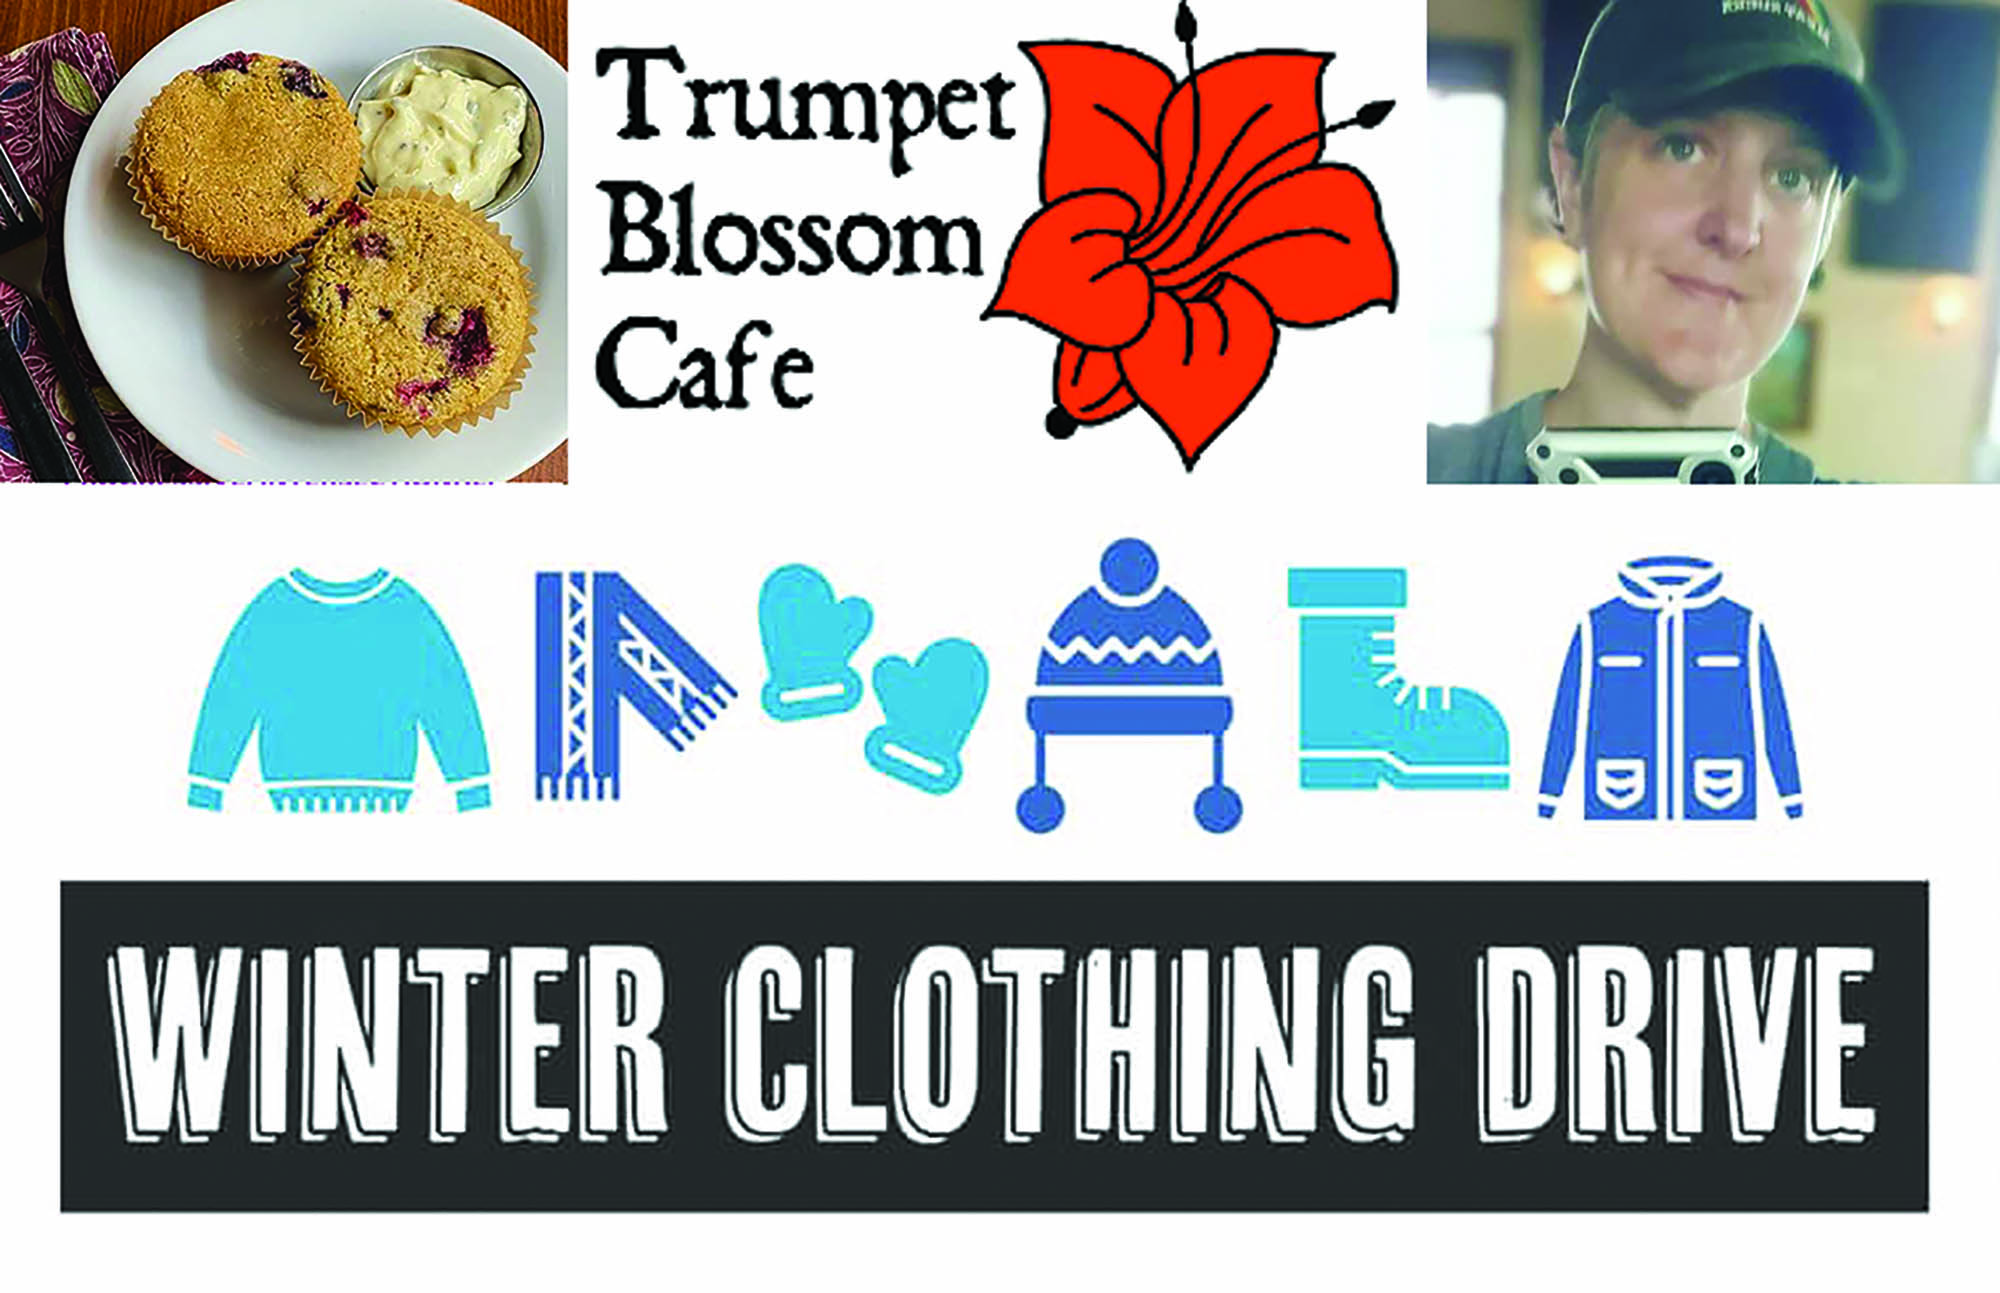 Winter clothing drive, new vegan offerings at Iowa City’s Trumpet Blossom Cafe